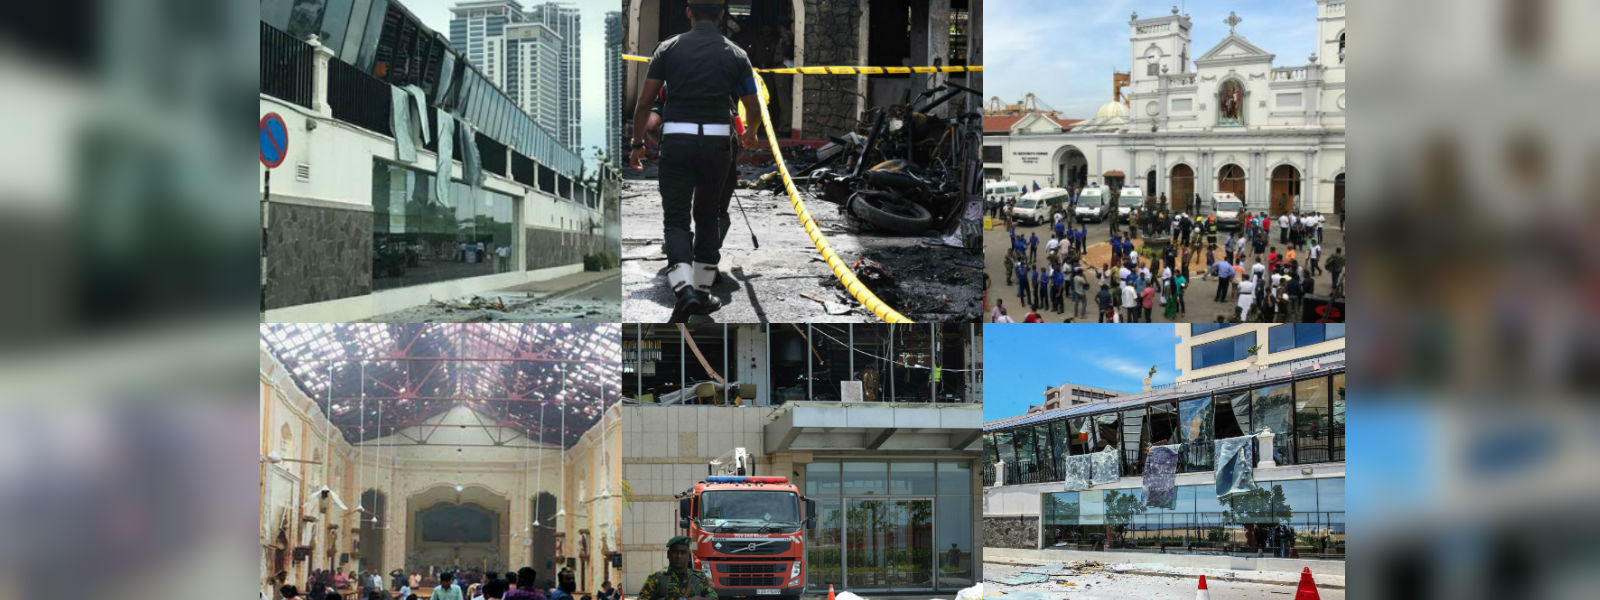 Interim report on 4/21 attacks to be handed over 